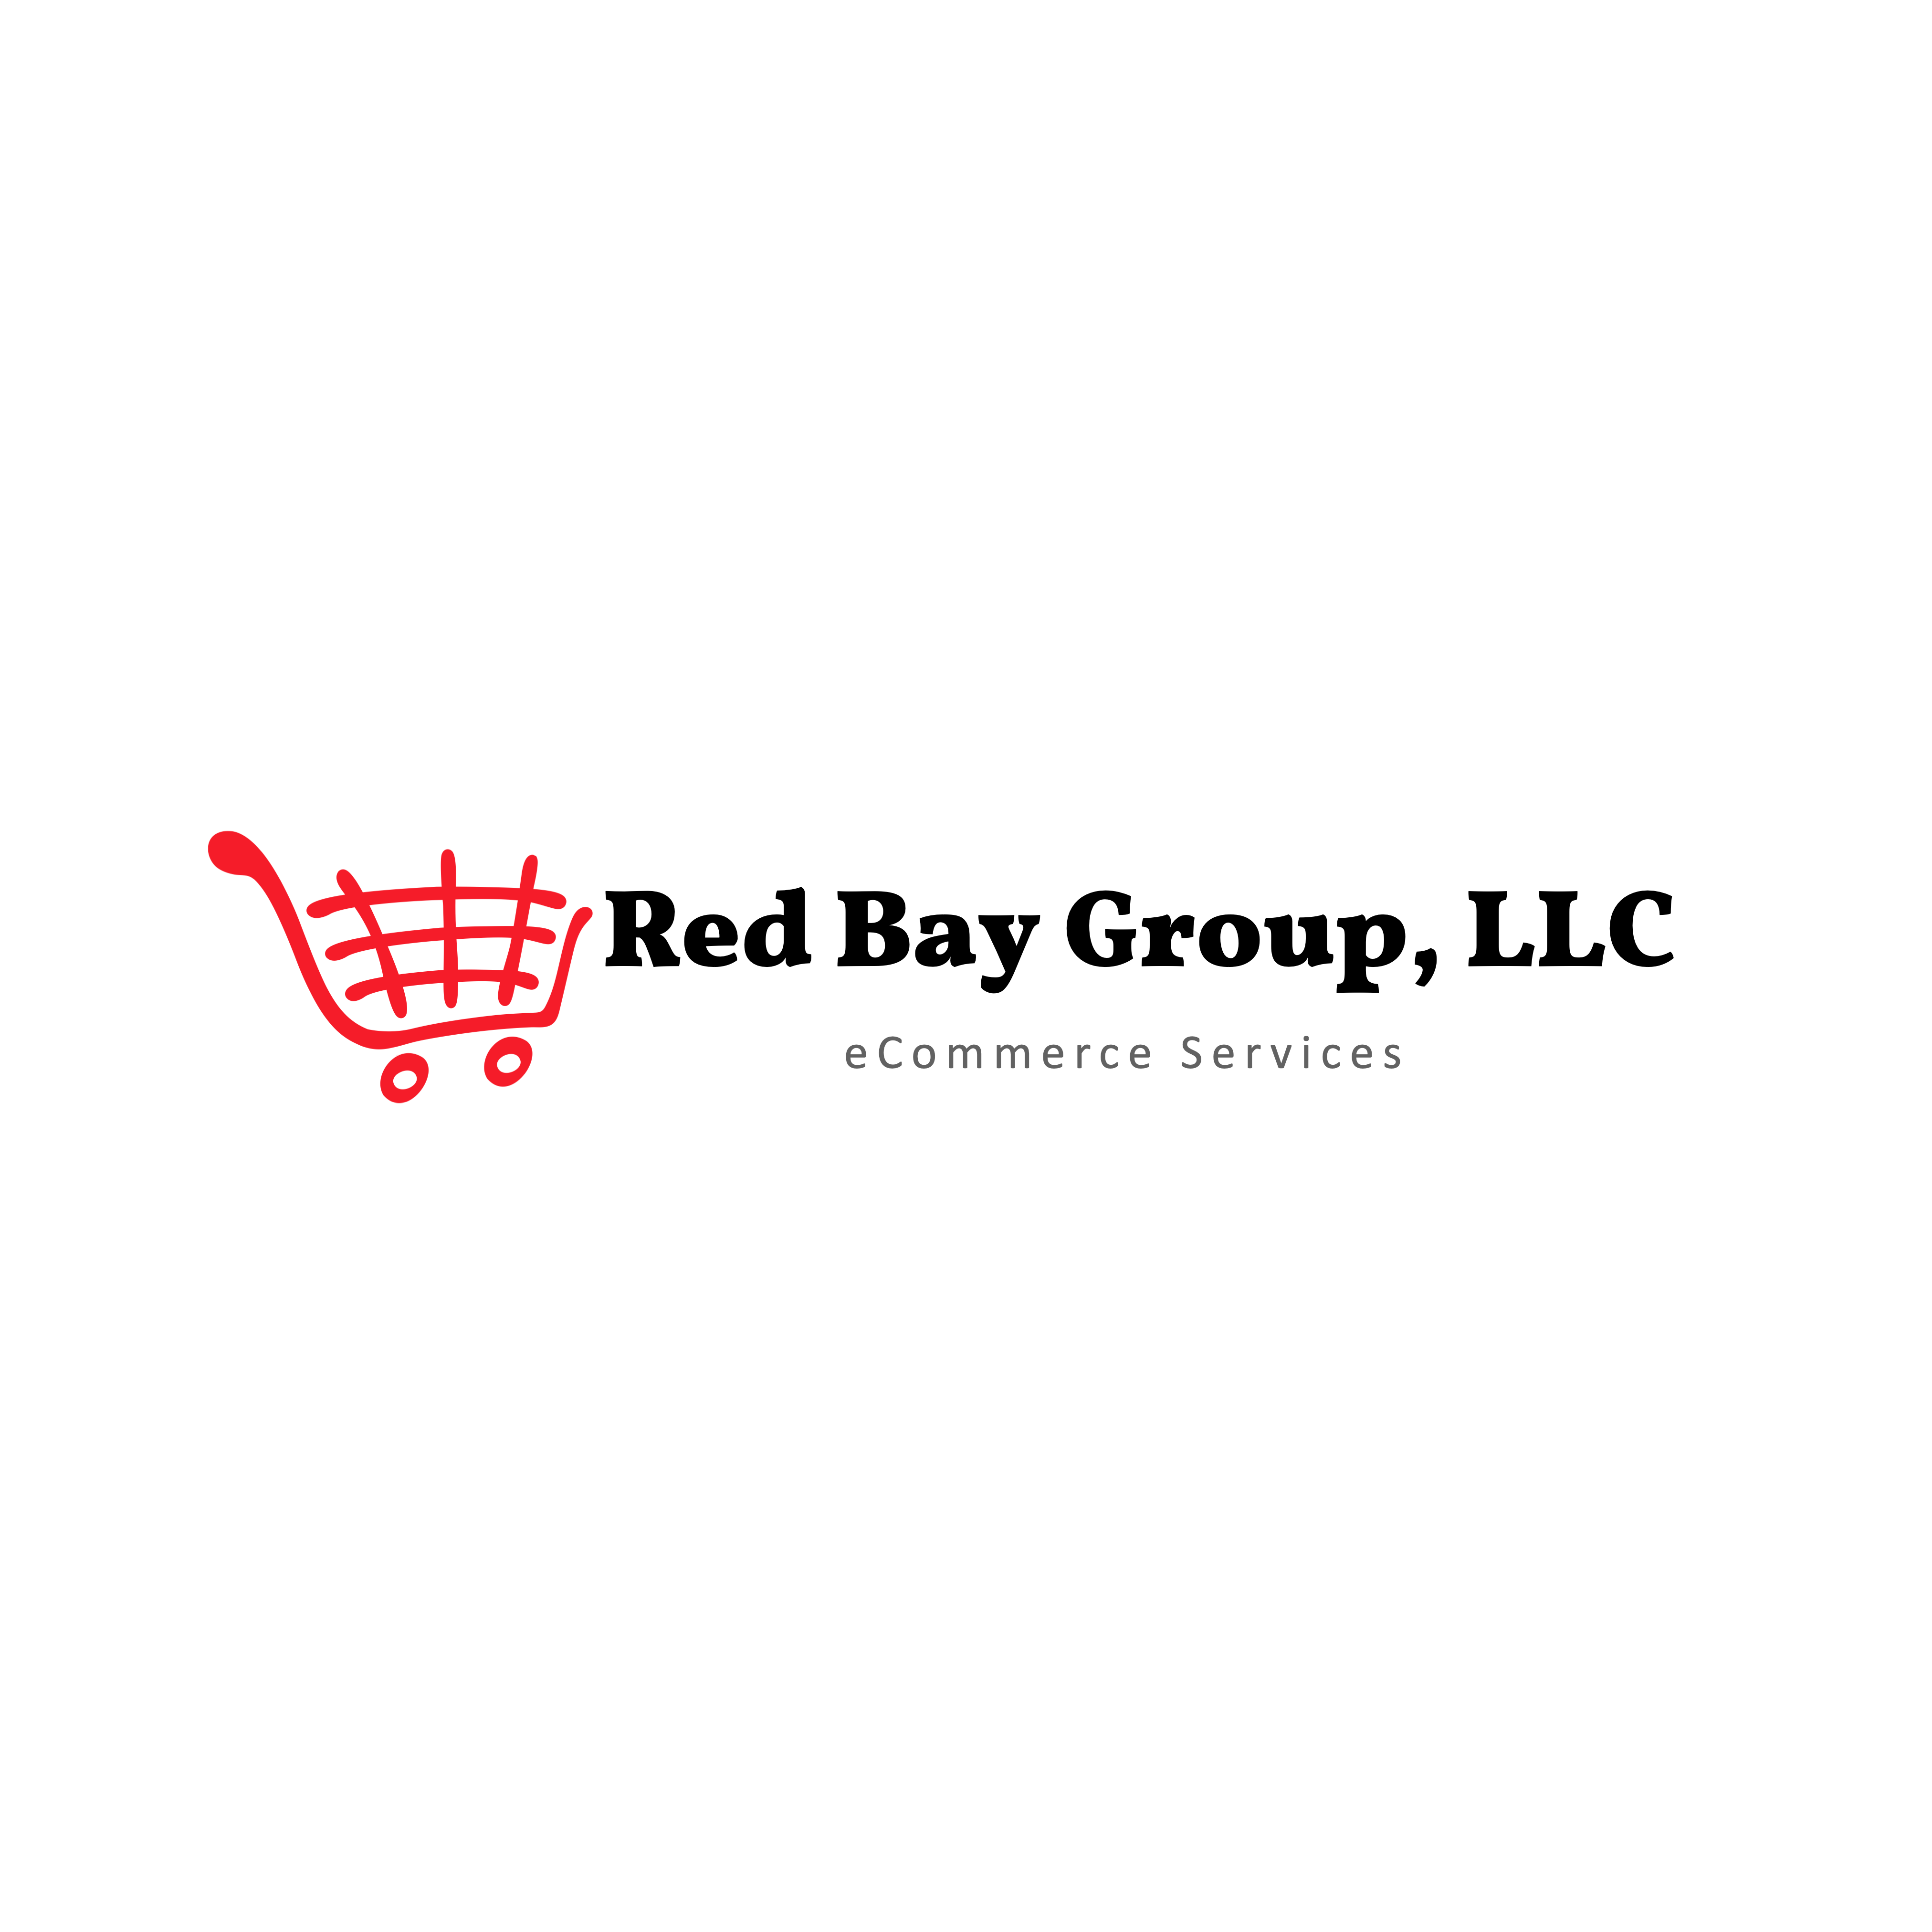 Website Hosting provided by Red Bay Group, LLC